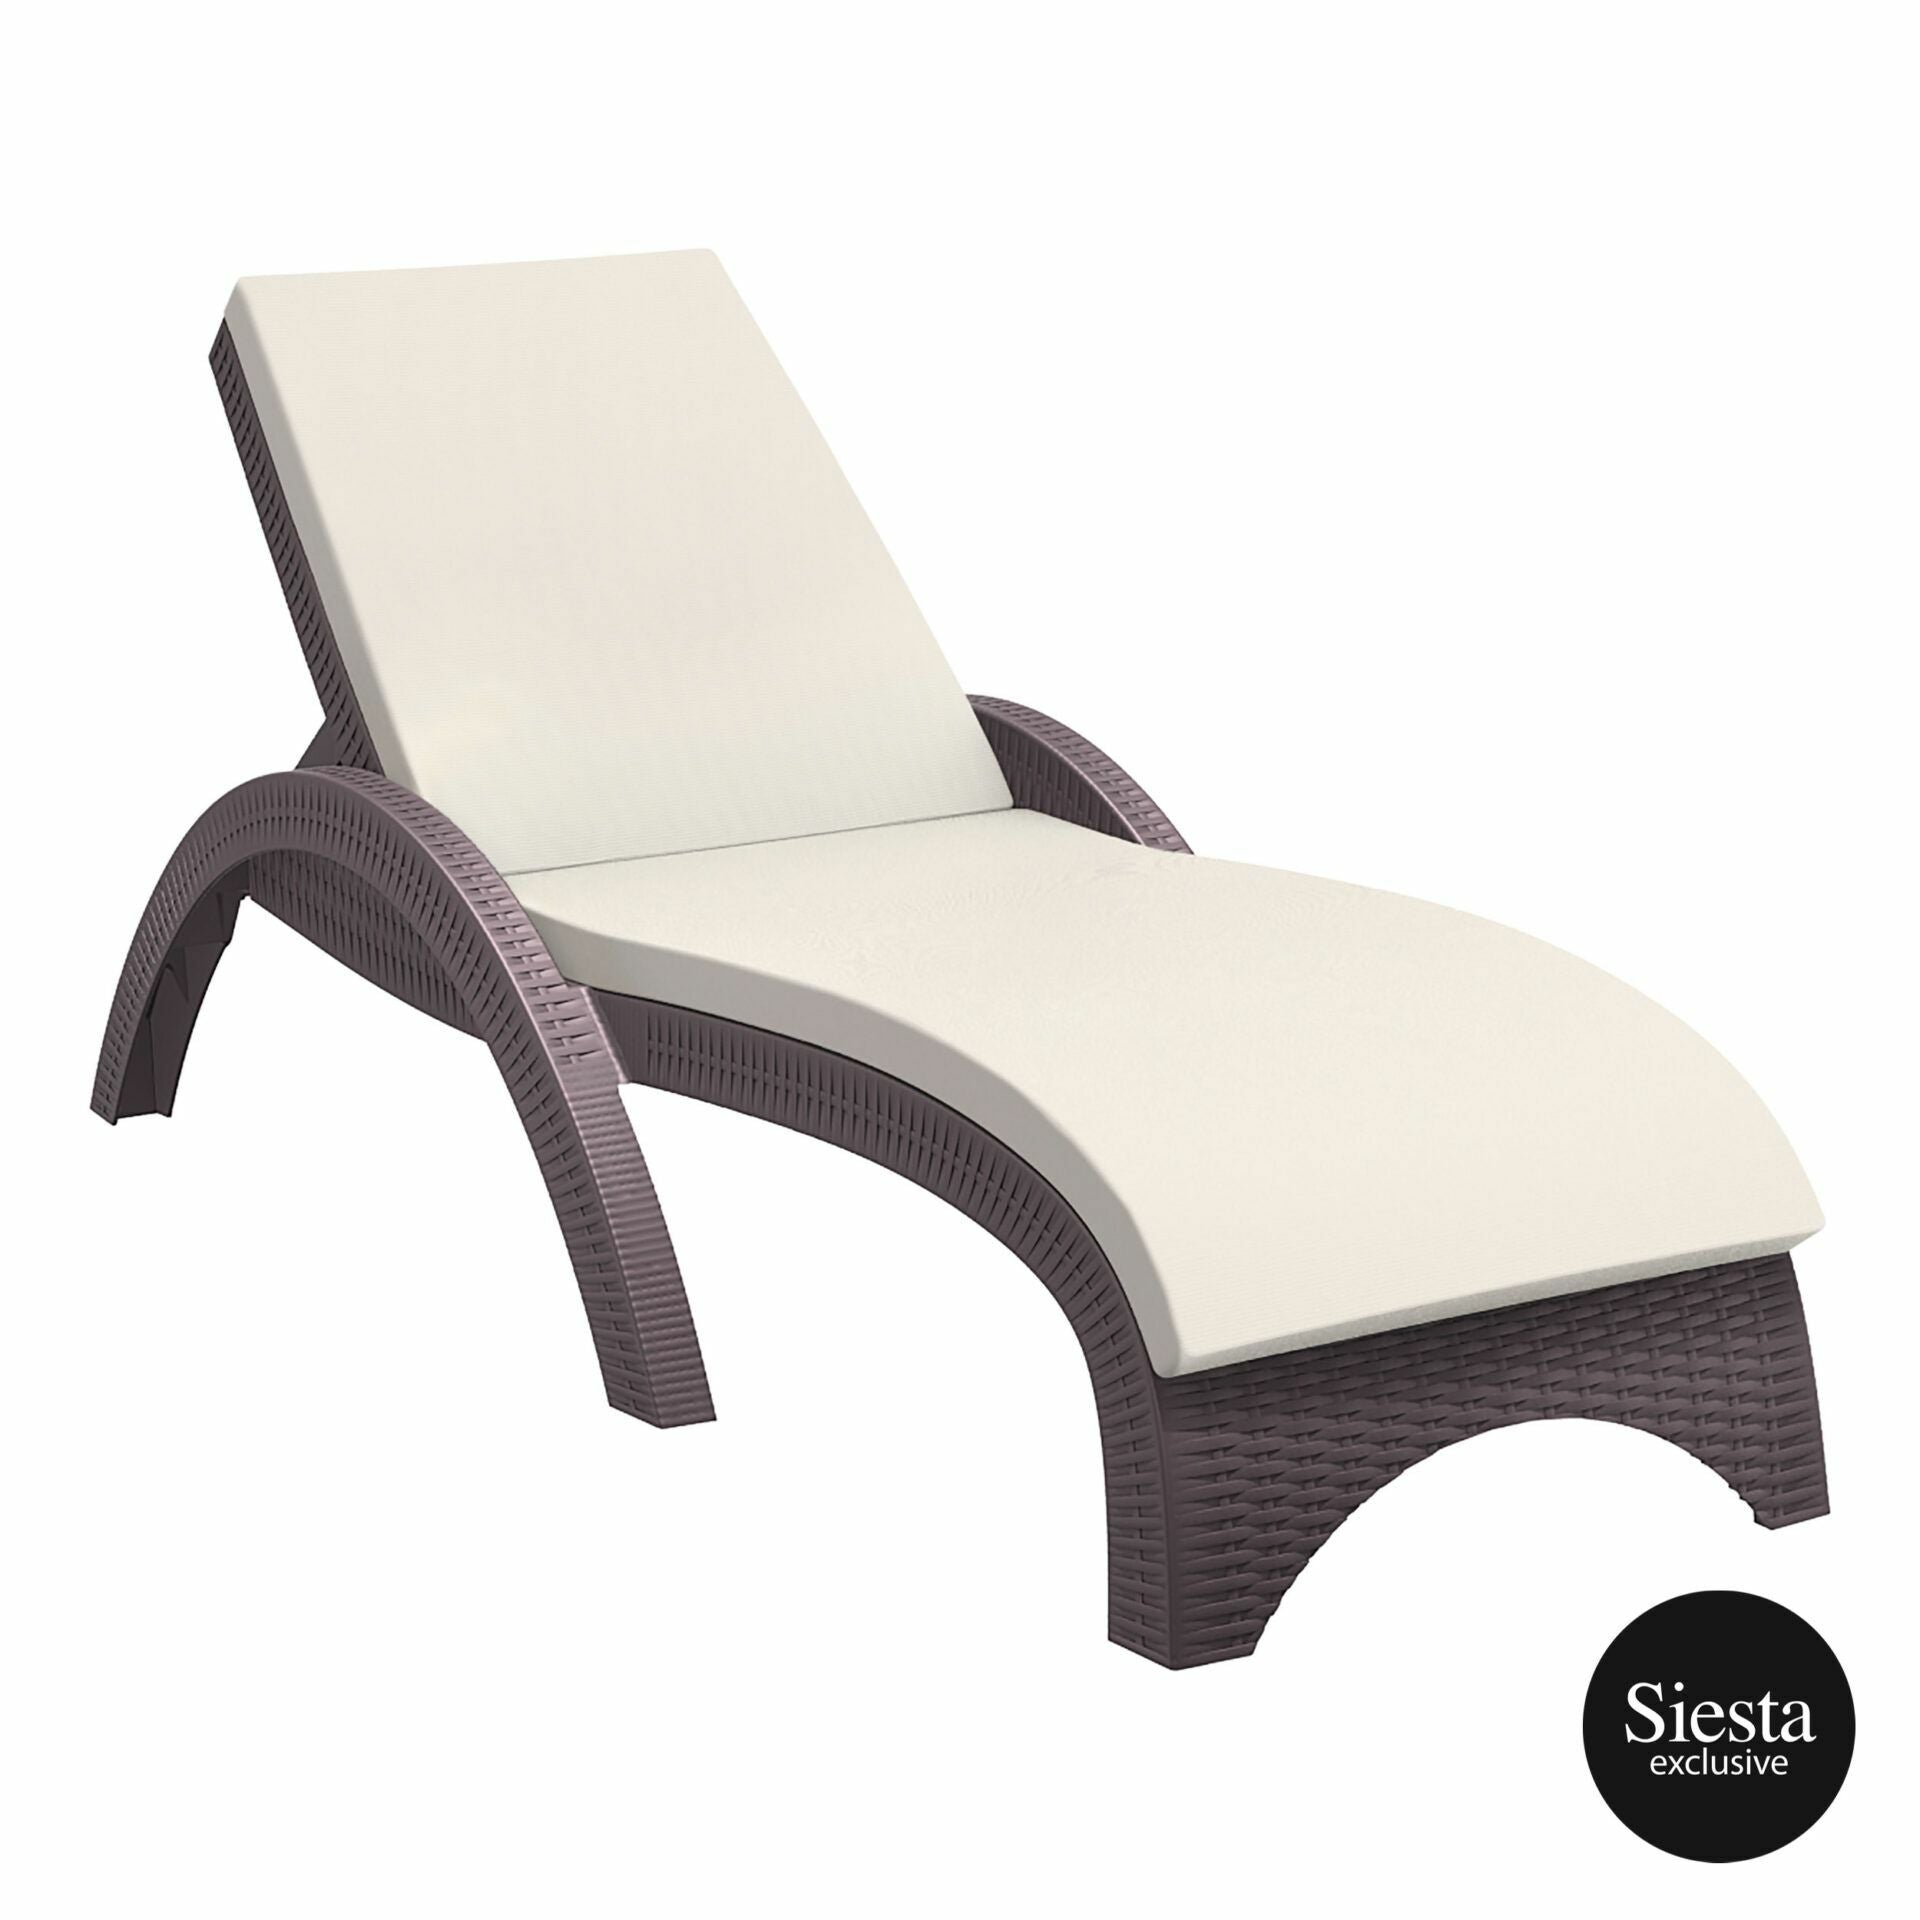 Fiji Sunlounger/Tequila Side Table 3 Pc Package - With Beige Cushion - Chocolate